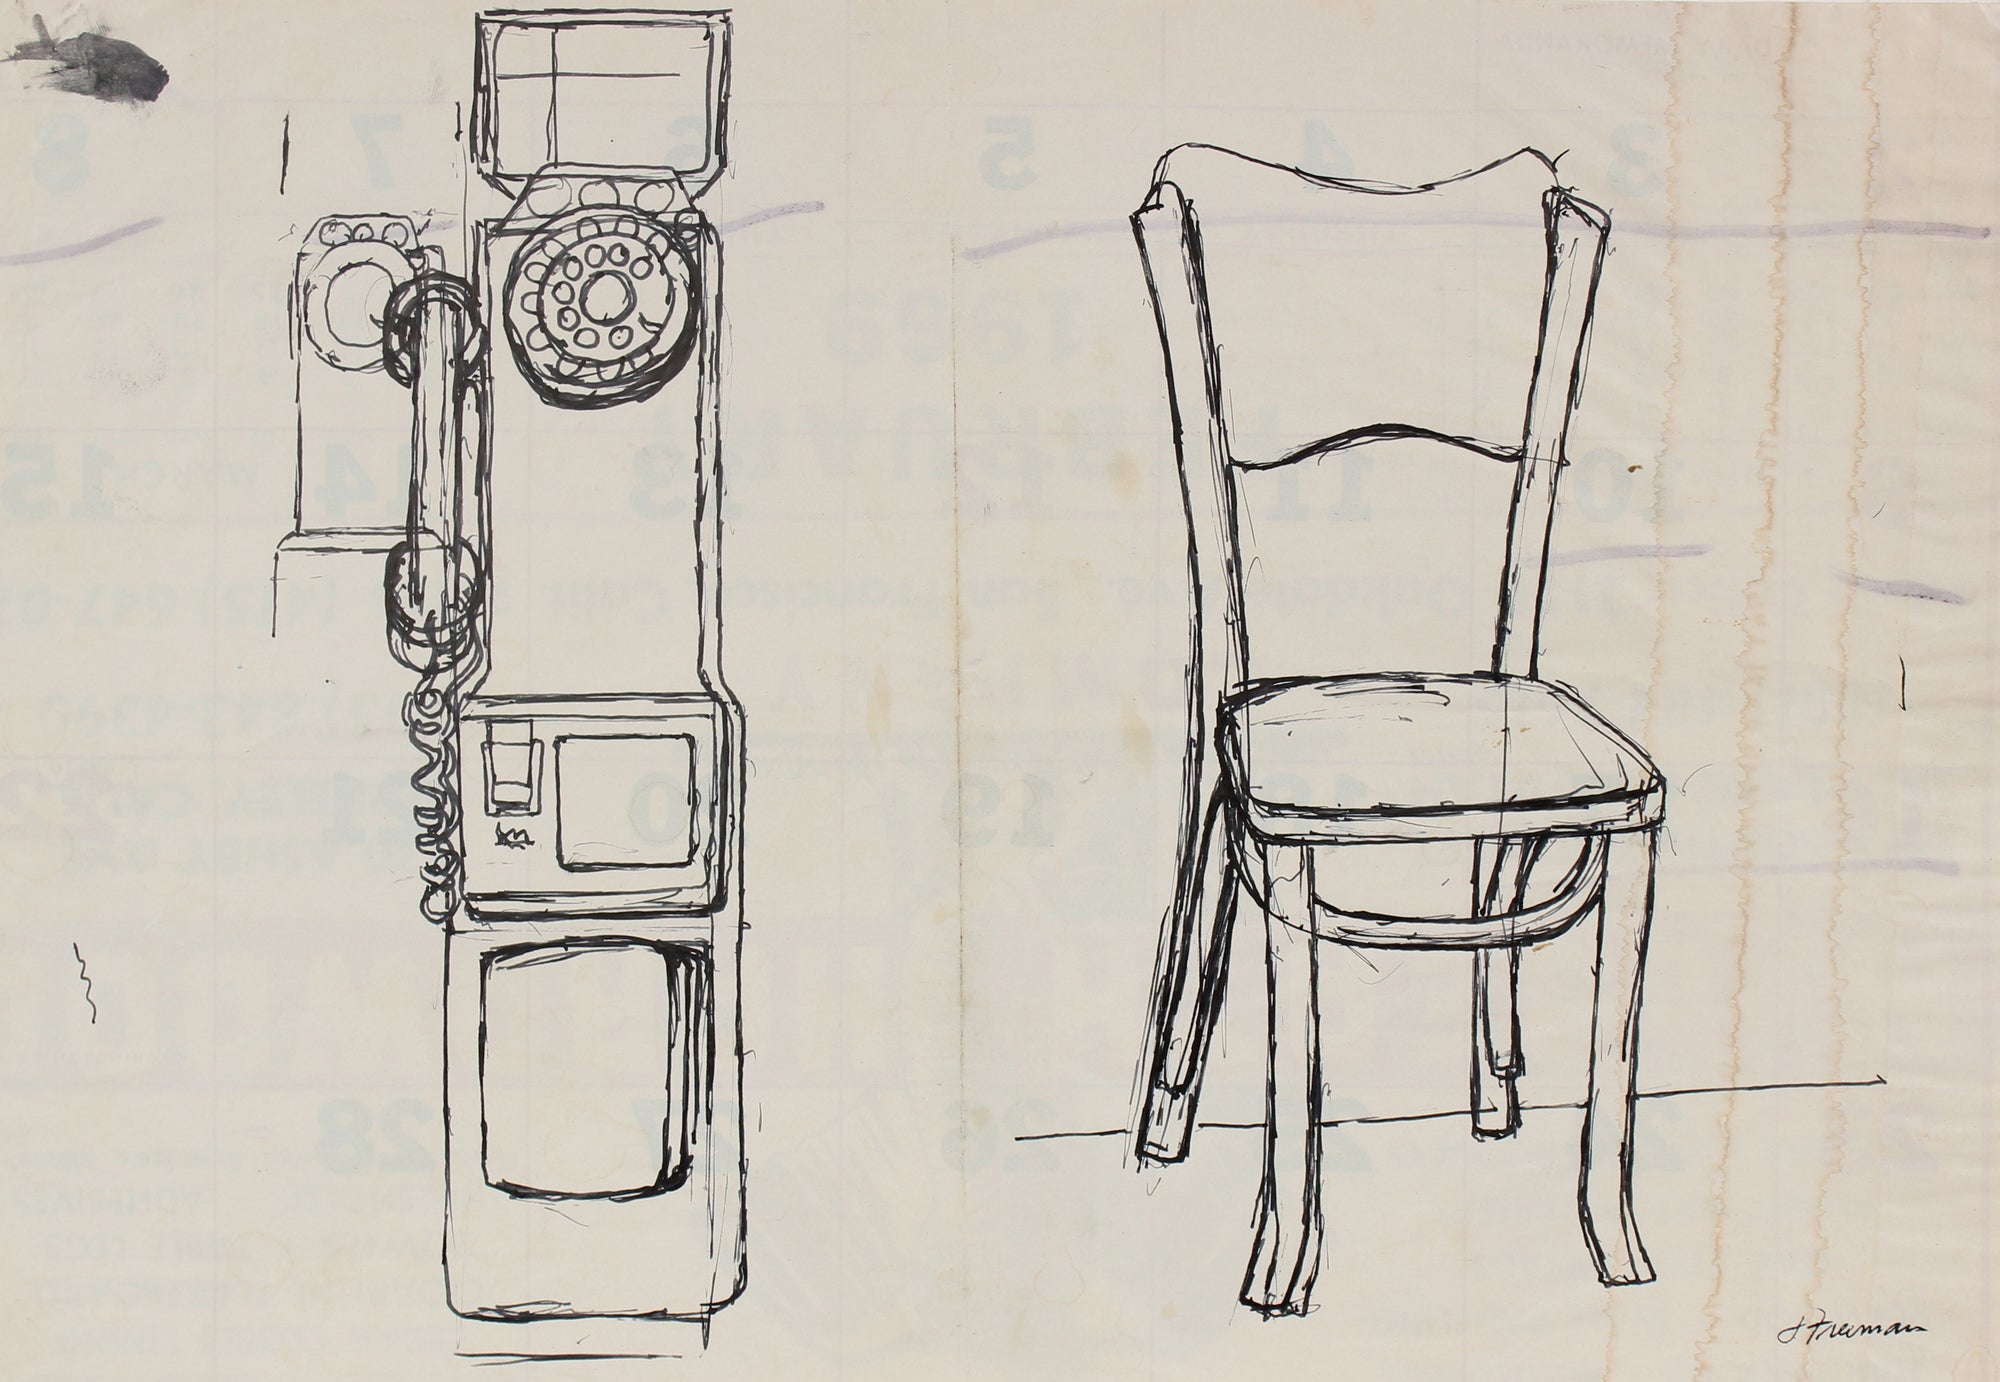 Study of Public Rotary Phone and Wooden Chair <br><br>#91440